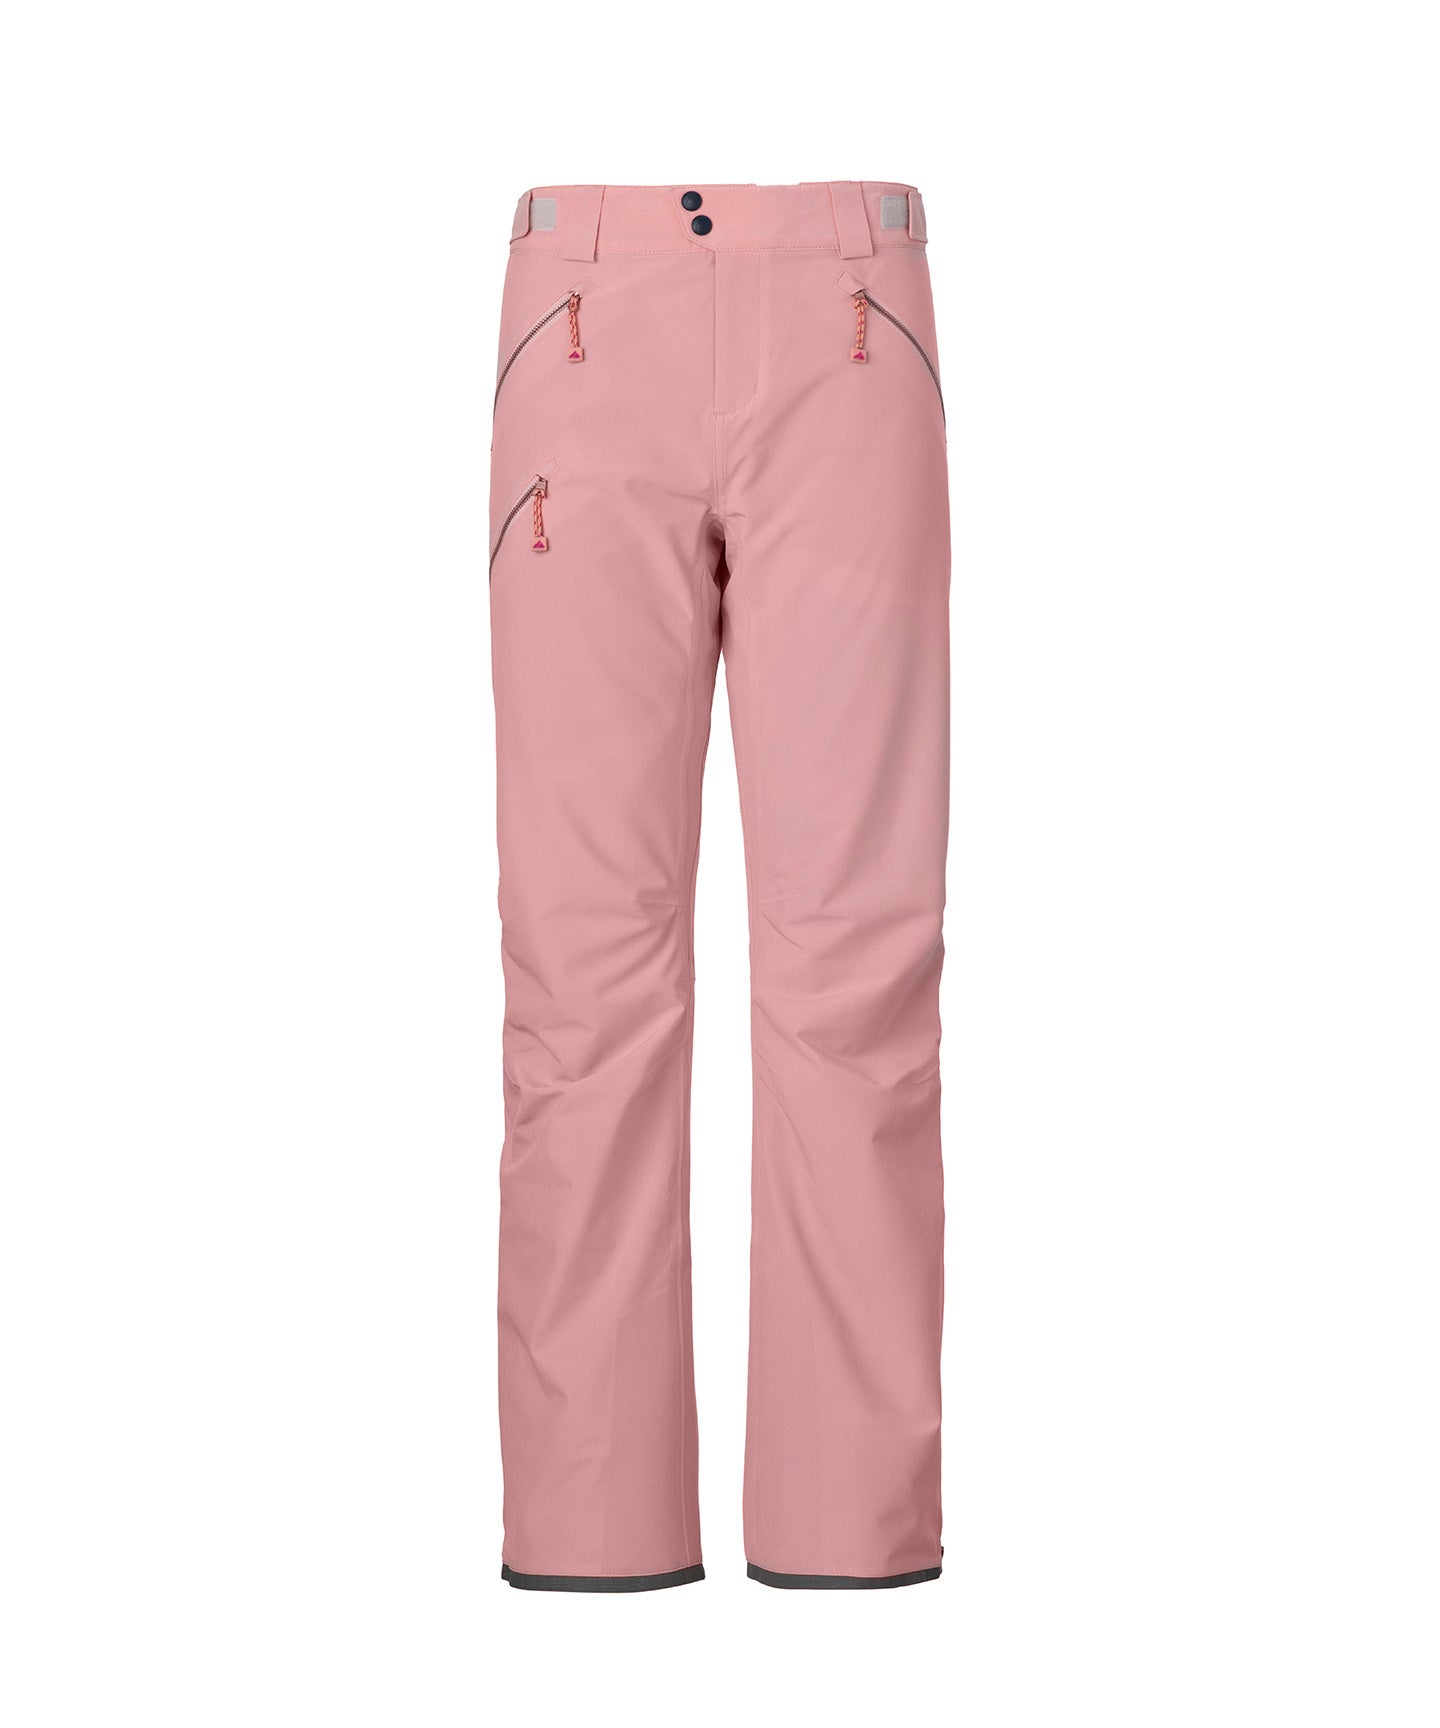 studio image of strafe outerwear 2023 pika  2l insulated pant in blush color